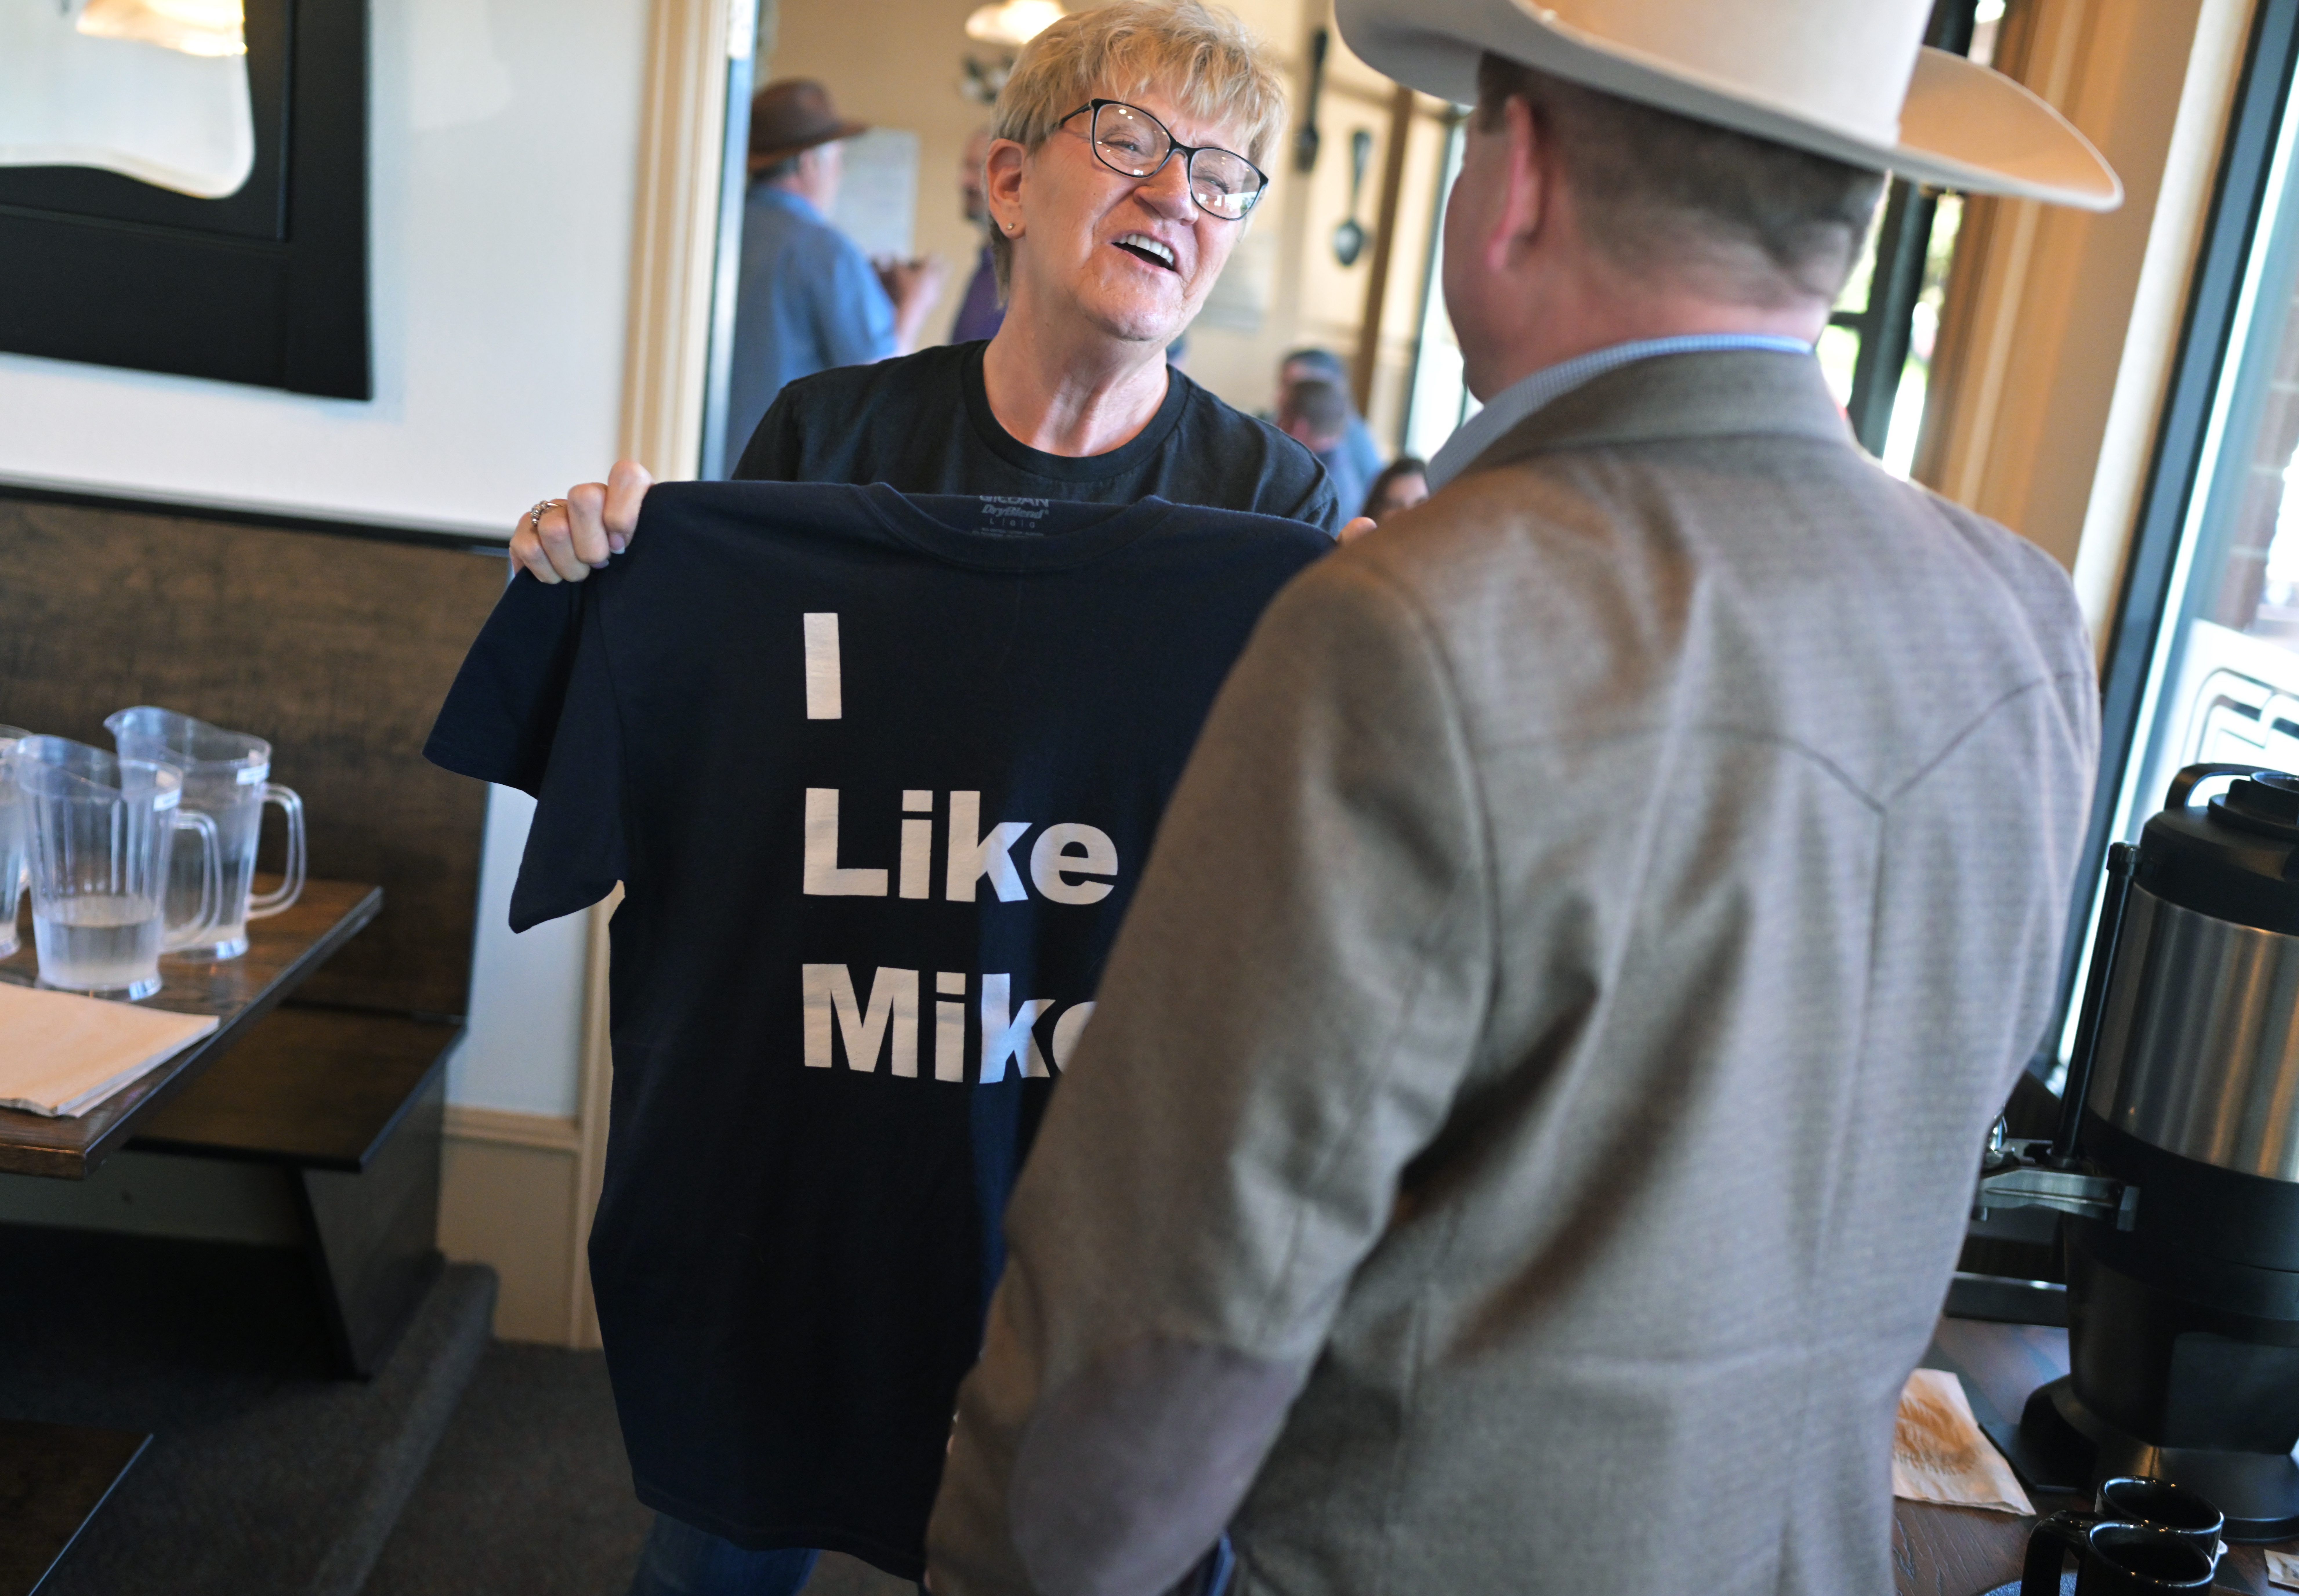 Mary Achziger, left, holds up a T-shirt she made in support of state Rep. Mike Lynch, right, as he arrives to speak with a group of Weld County GOP members during a breakfast event at Epic Egg Restaurant in Greeley on June 5, 2024. Lynch spoke with the group about why he is running in the 4th Congressional District primary race. (Photo by RJ Sangosti/The Denver Post)